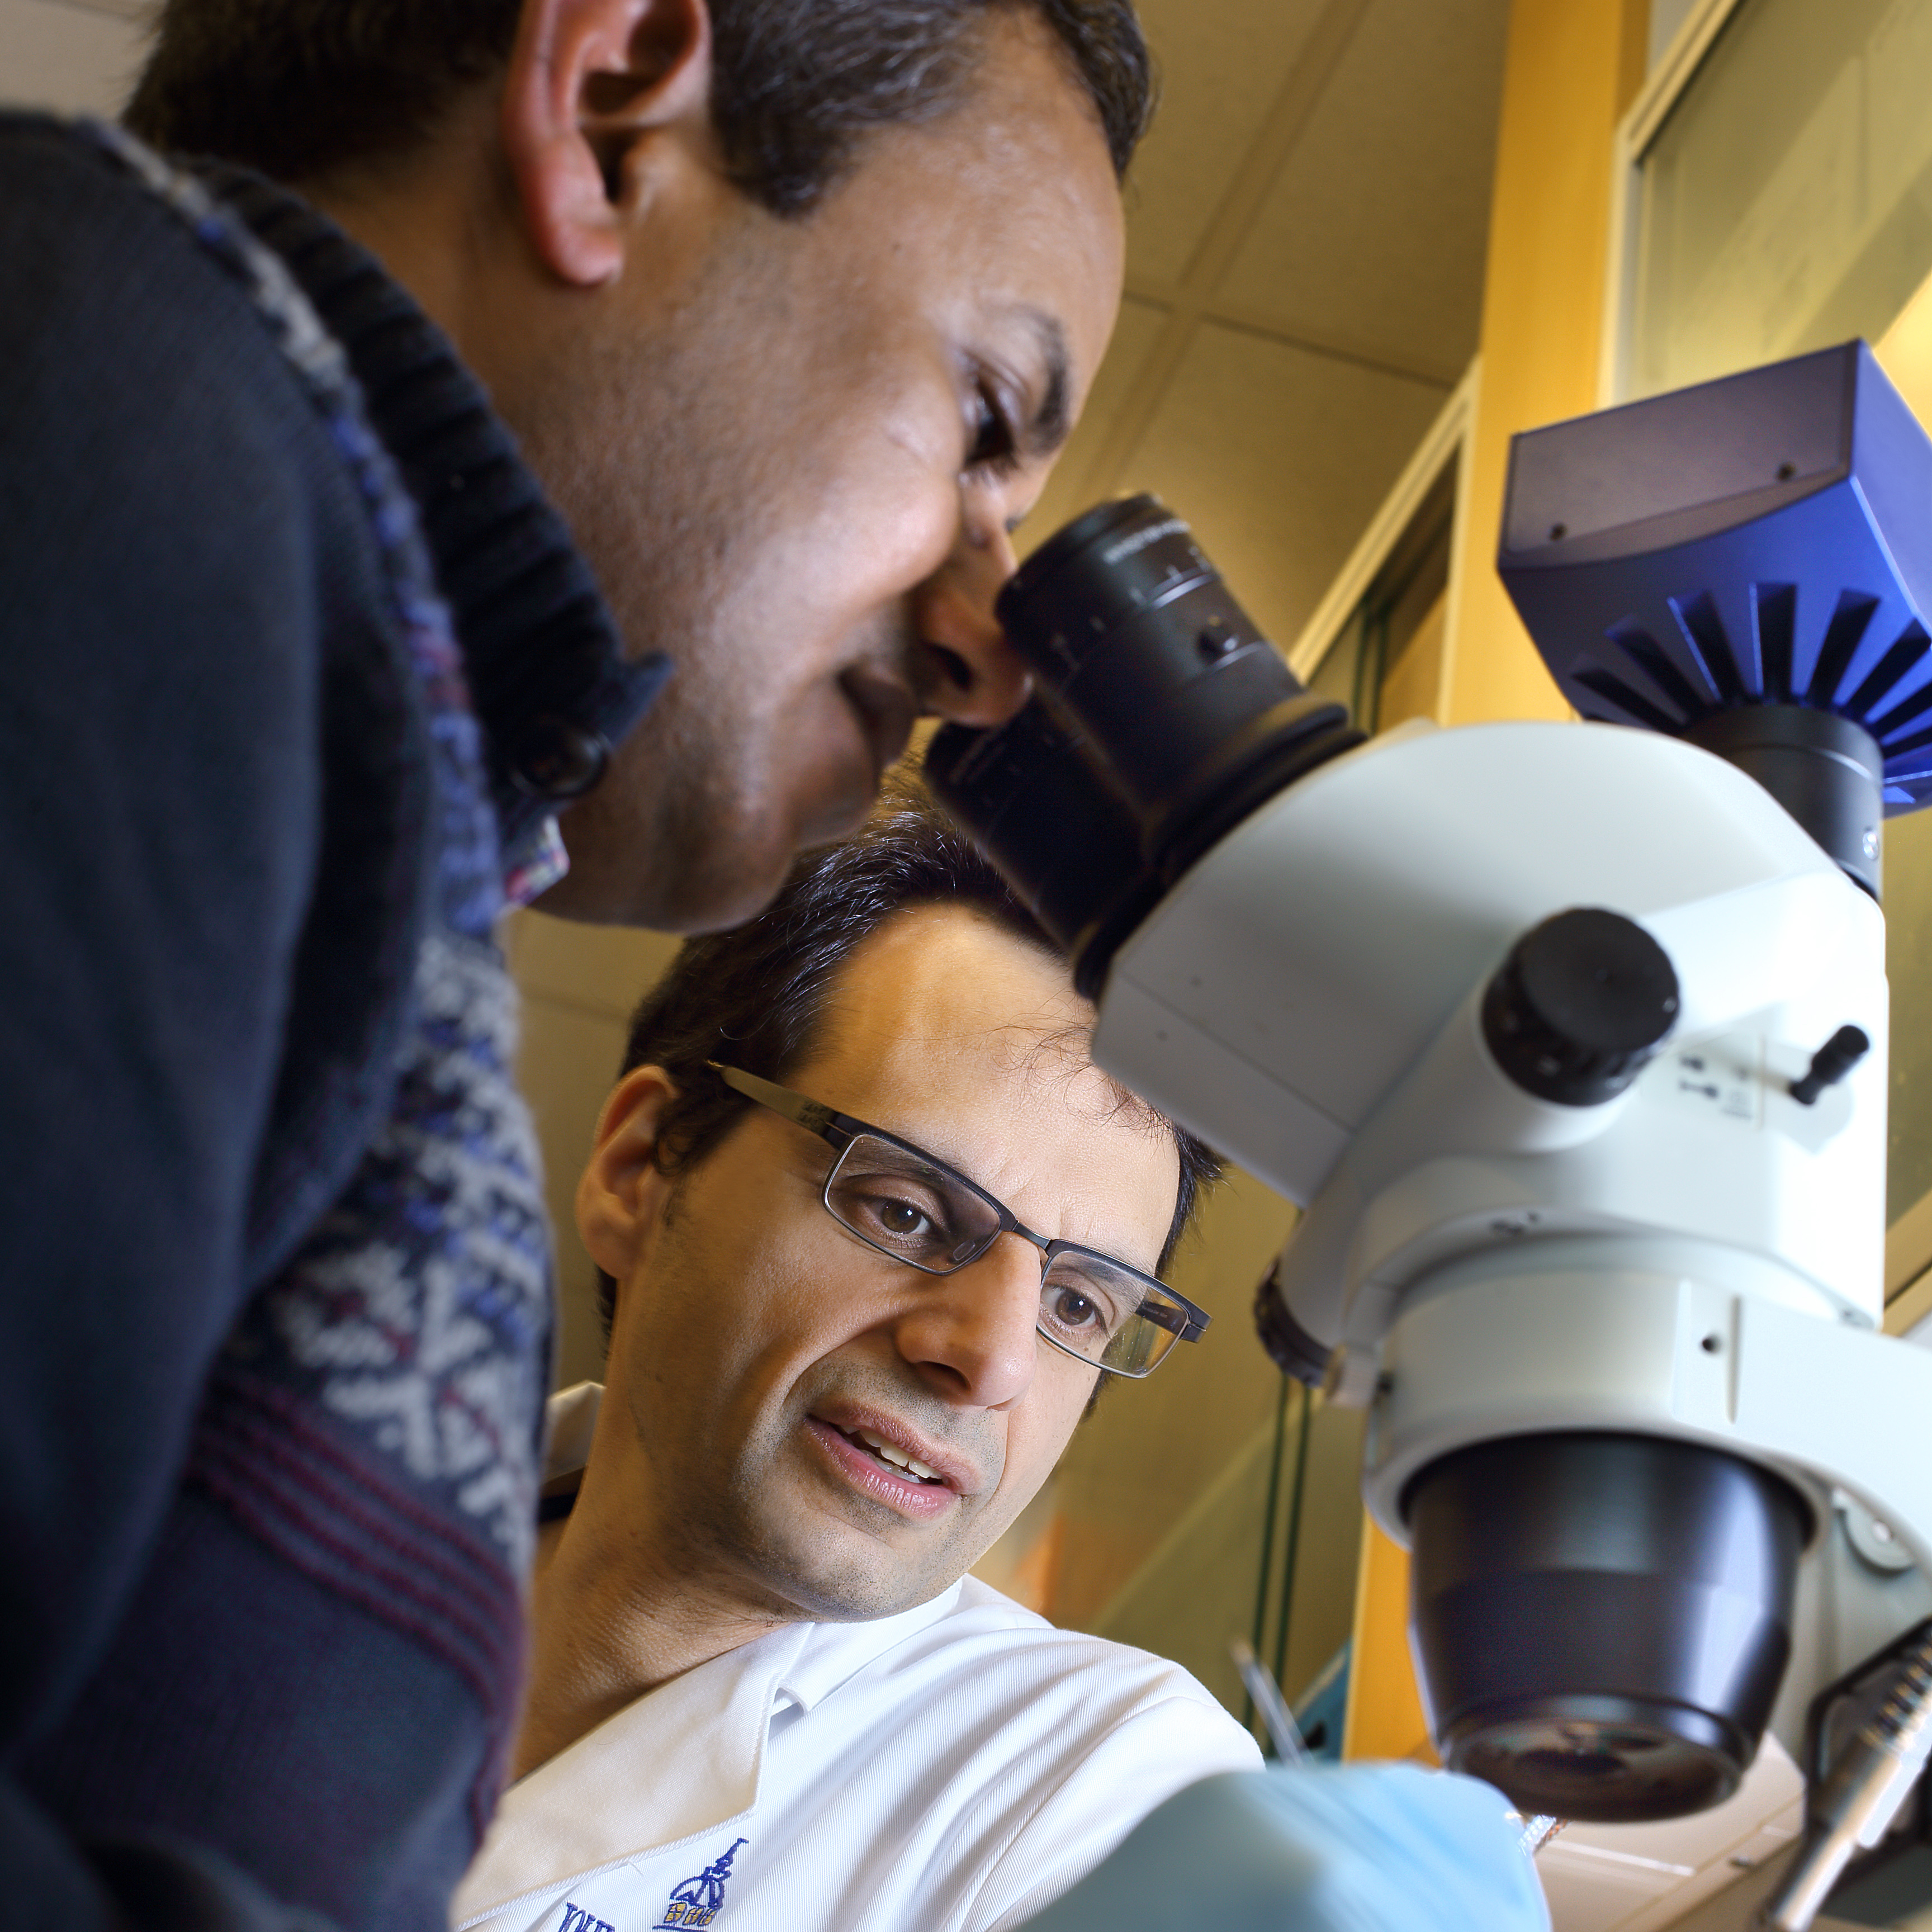 Faculty member looks into a microscope as David Hackam observes